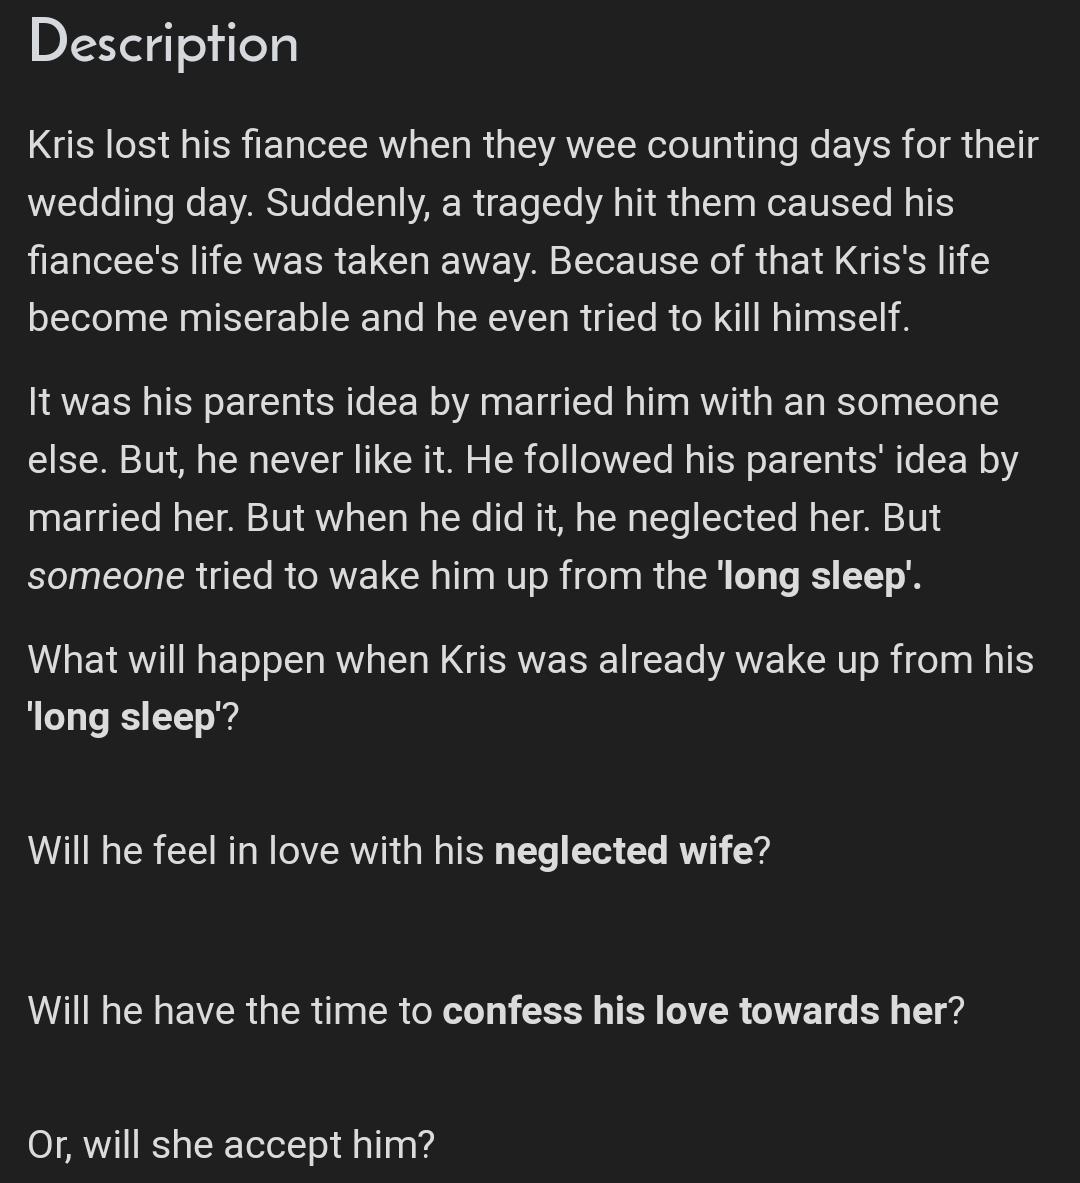 Secret Love [TW](KrisxOC)Tags : abuse//angst//sad//you//exokris//kriswuWords : 8.365 wordsthis is so ... idk i just love it when i read it it just hit my heart, its not like bawling hard but its there :)), YOU should read it, short story.  https://www.asianfanfics.com/story/view/224299/secret-love-edited